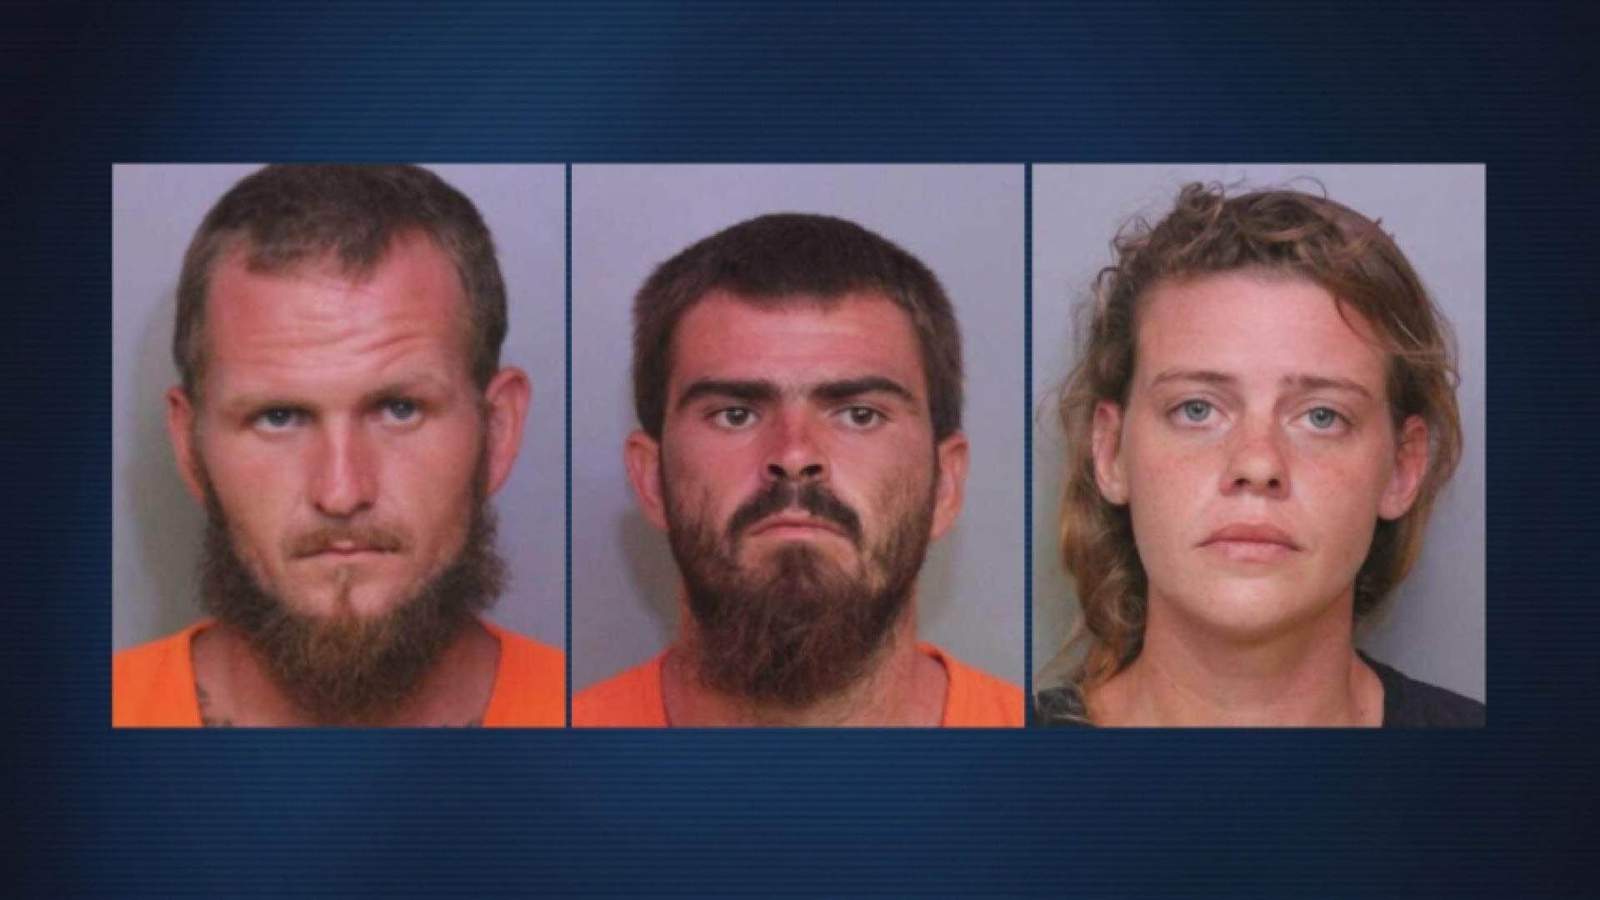 ‘Pure evil in the flesh': Man among 3 charged in fishing trip ‘massacre’ had 230 felony charges in his arrest history